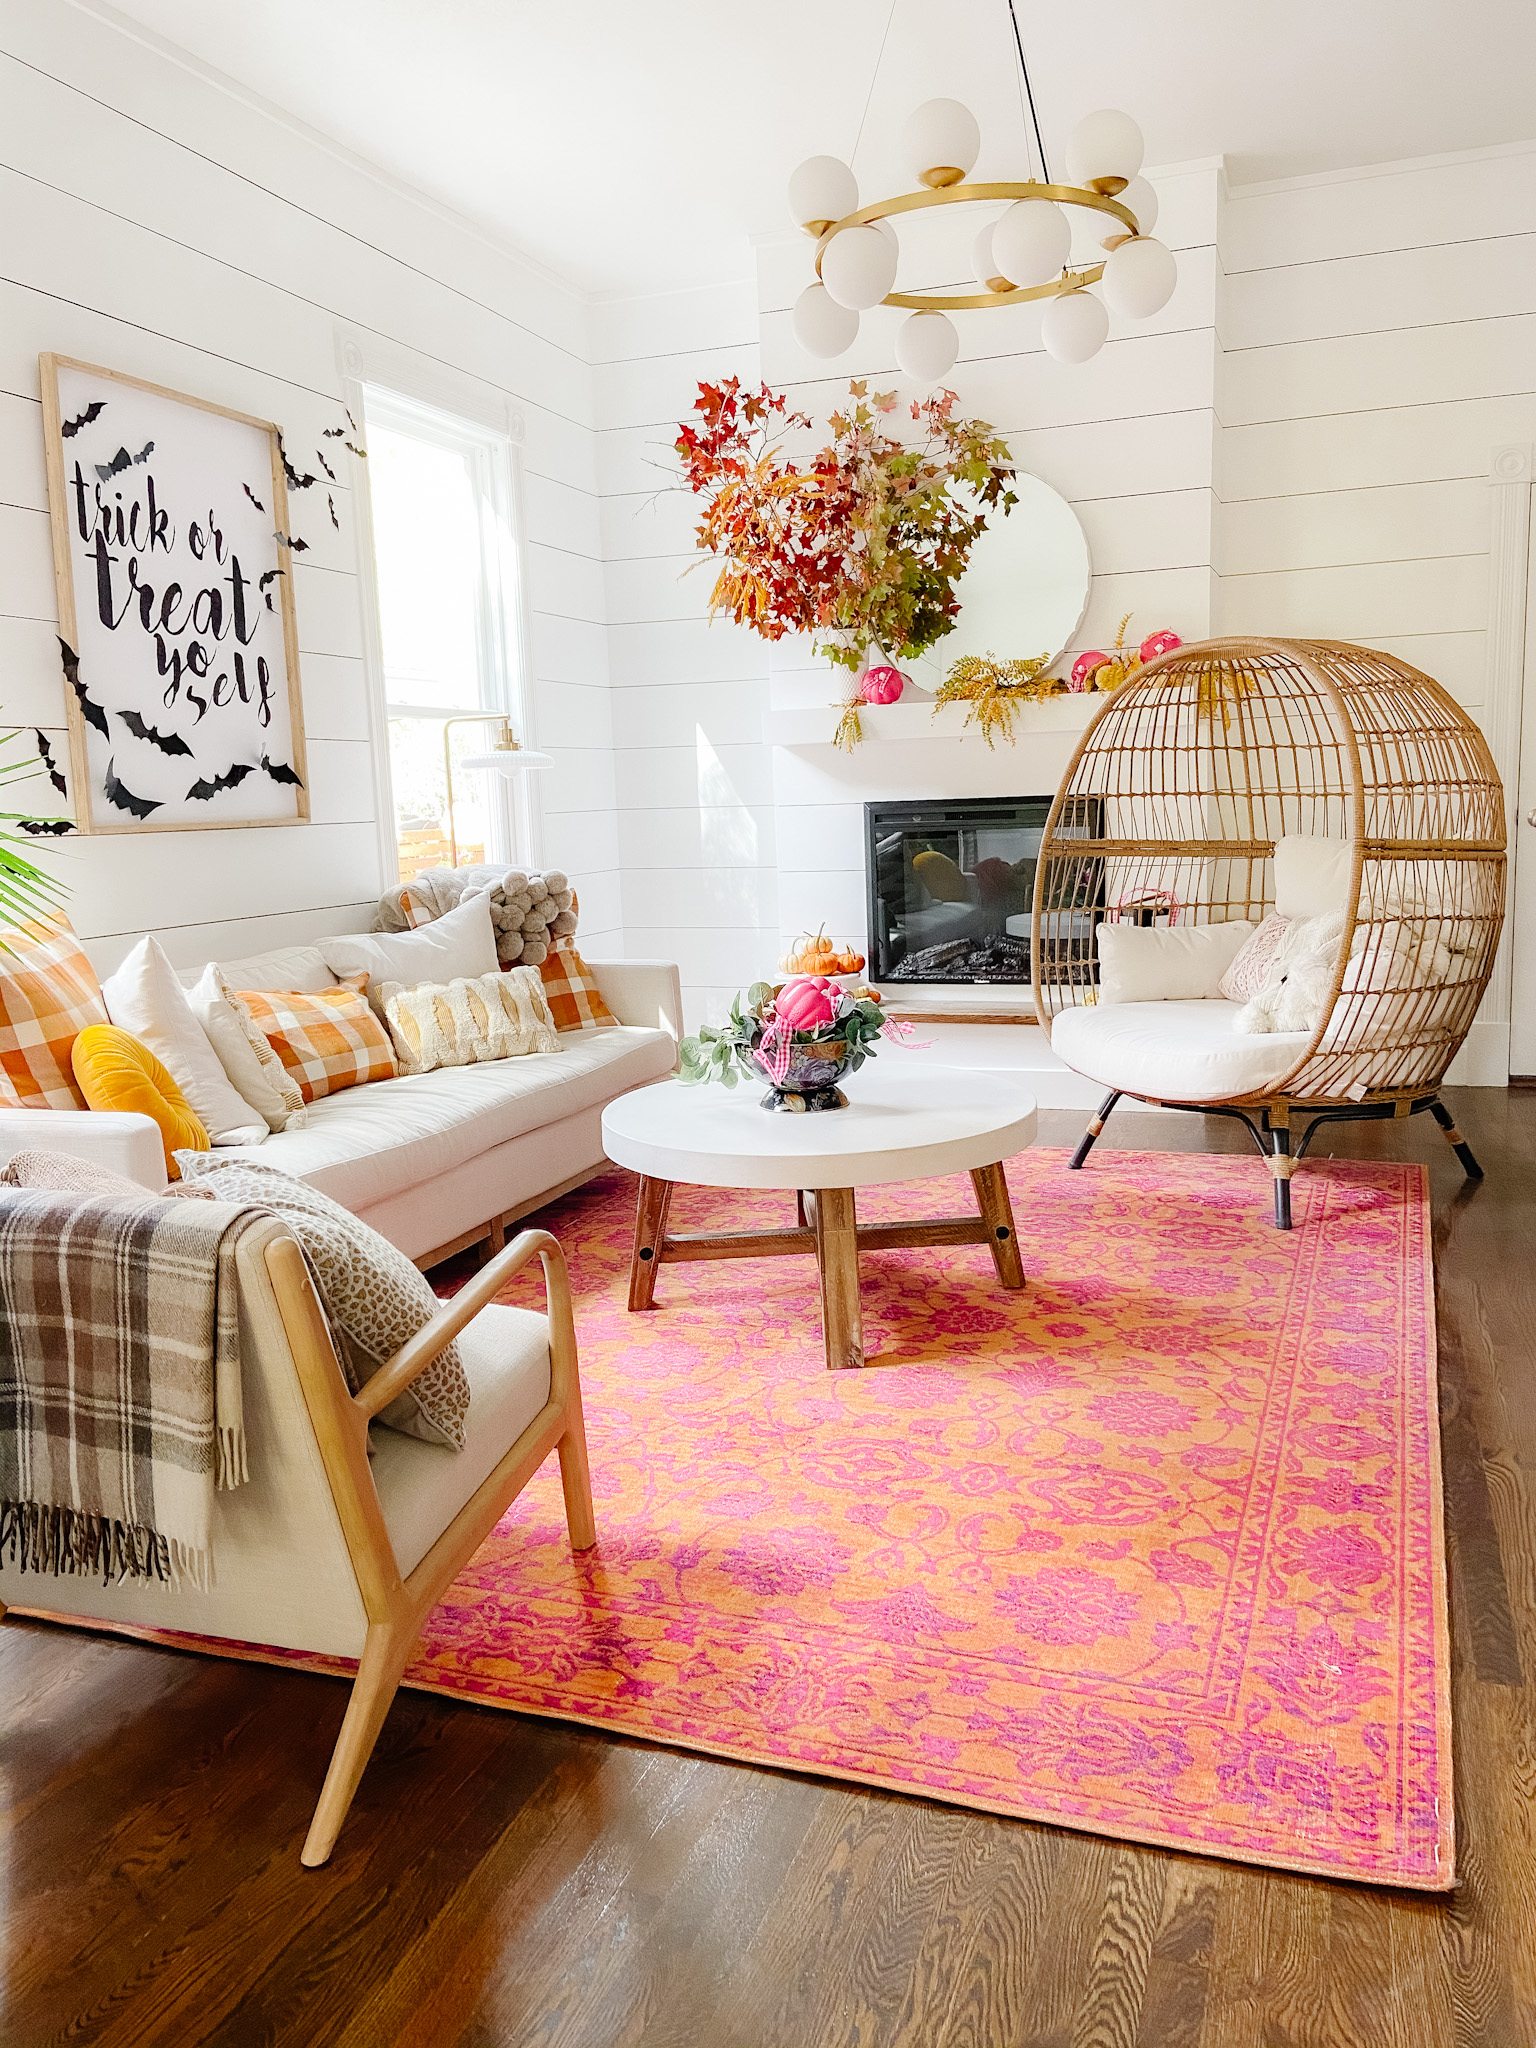 Ways to Bring Color into Your Cottage Home for Fall. Bring BRIGHT colors into your Fall home with colorful accessories, rugs and natural elements!